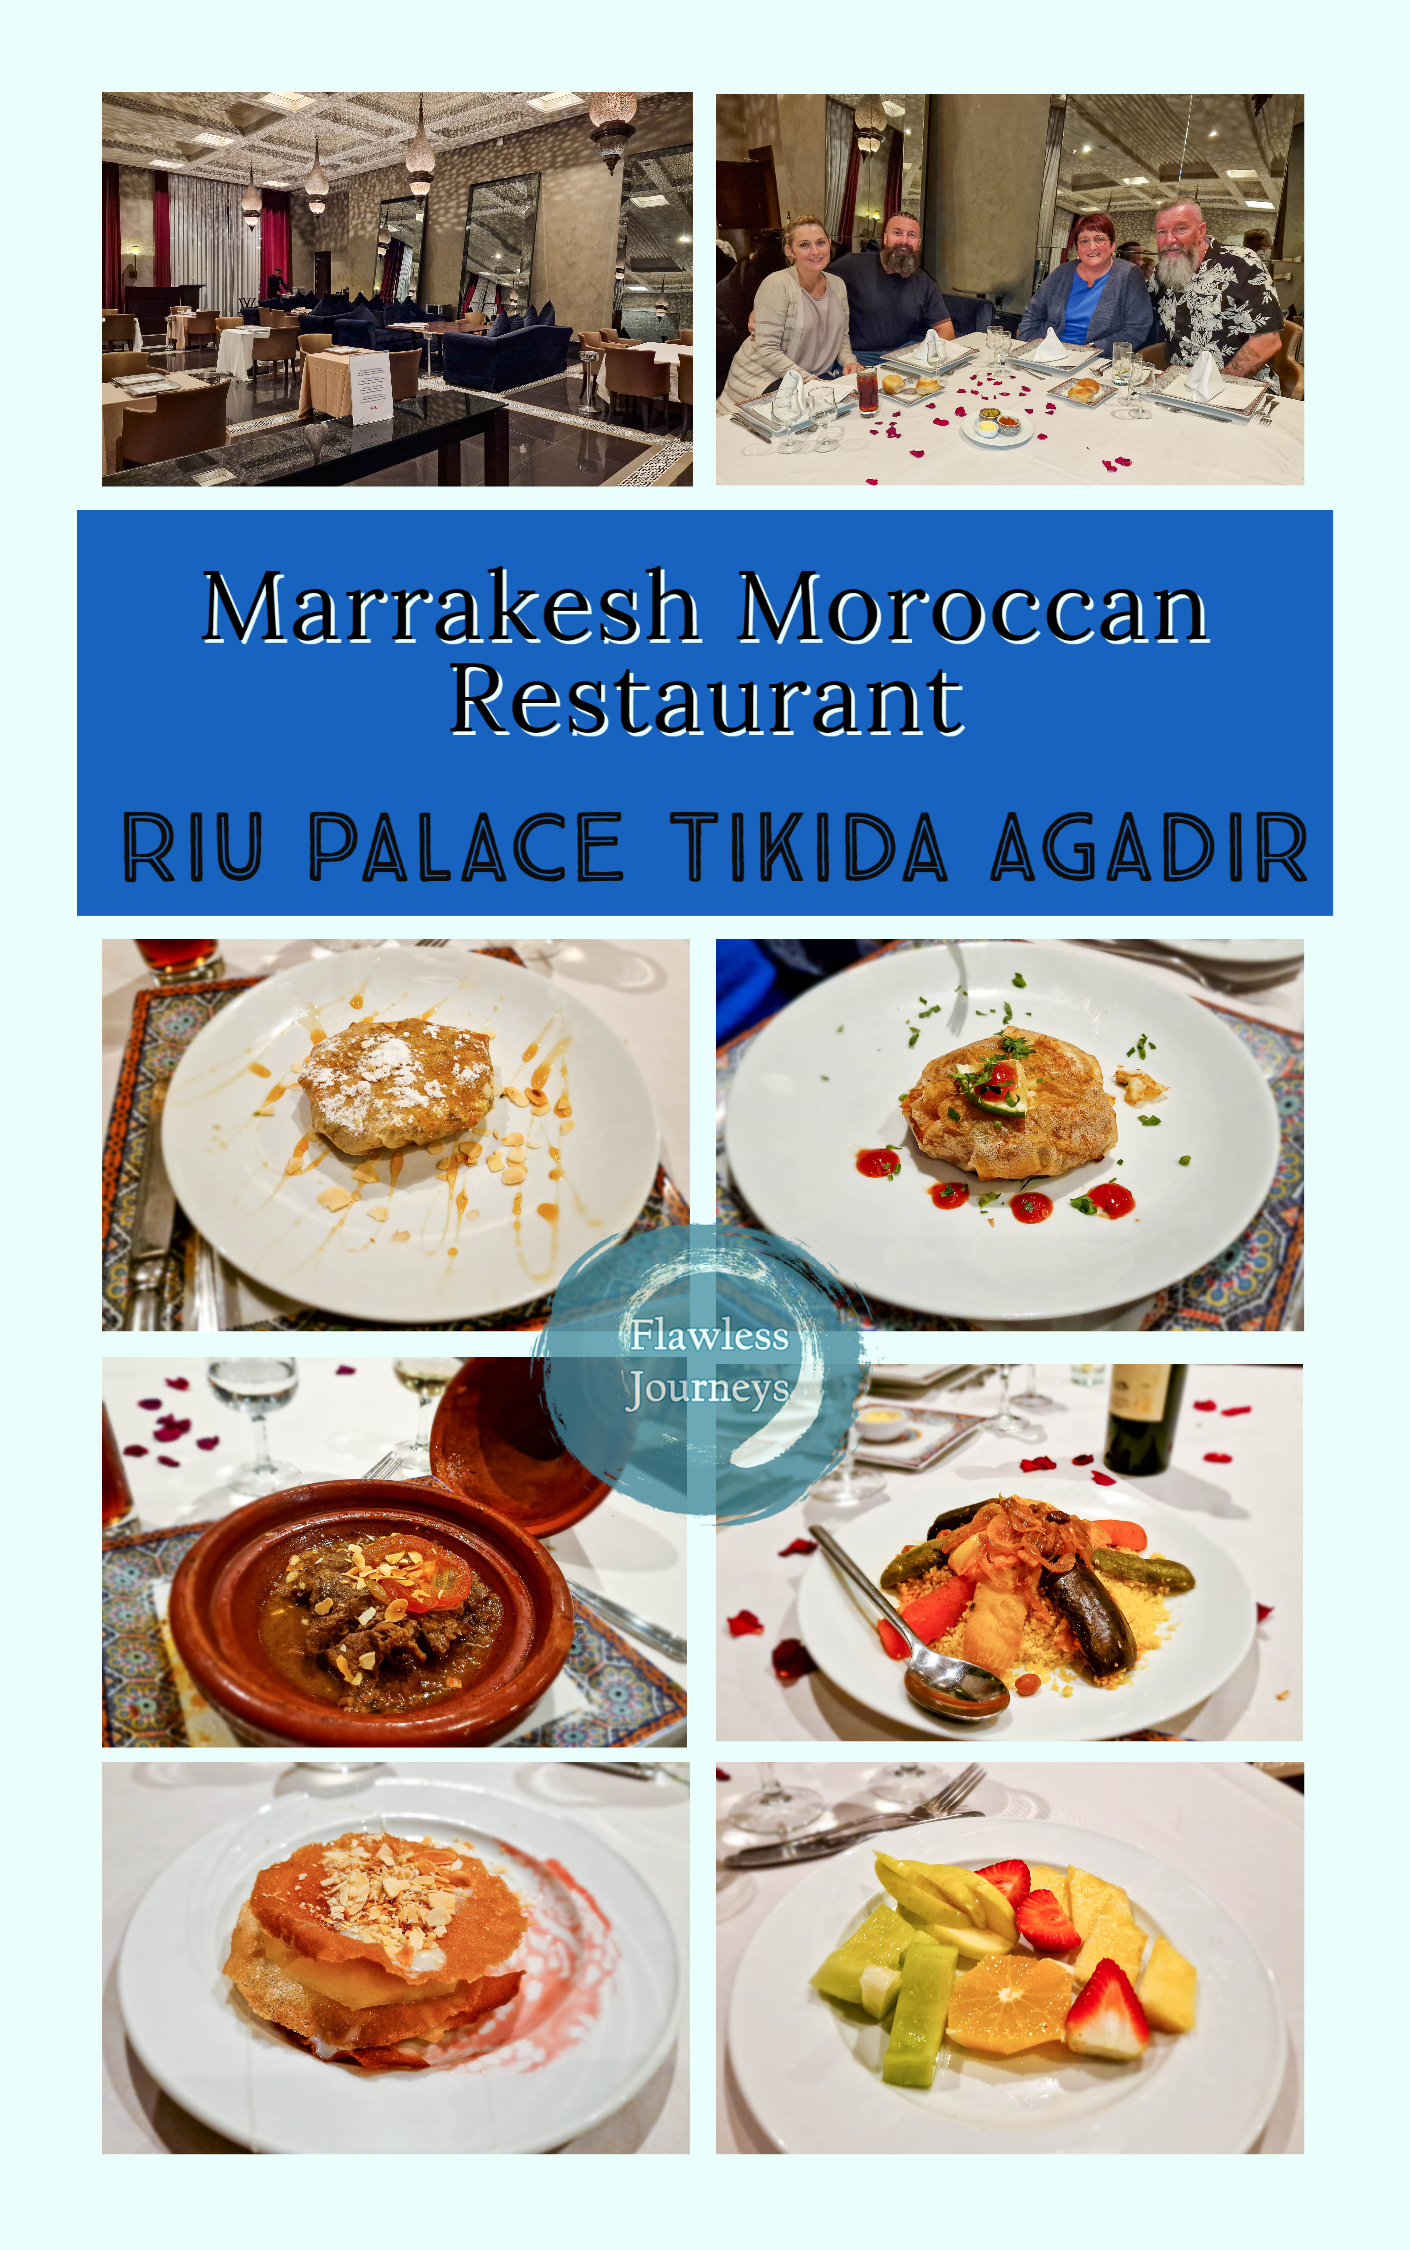 Images of starter, main and desserts served at Marrakesh Moroccan Restaurant inside Riu Palace Tikida Agadir Hotel which consist of seafood and chicken pastilla, beef tagine, cous cous with vegetables, fresh fruit salad and a milk bastilla   